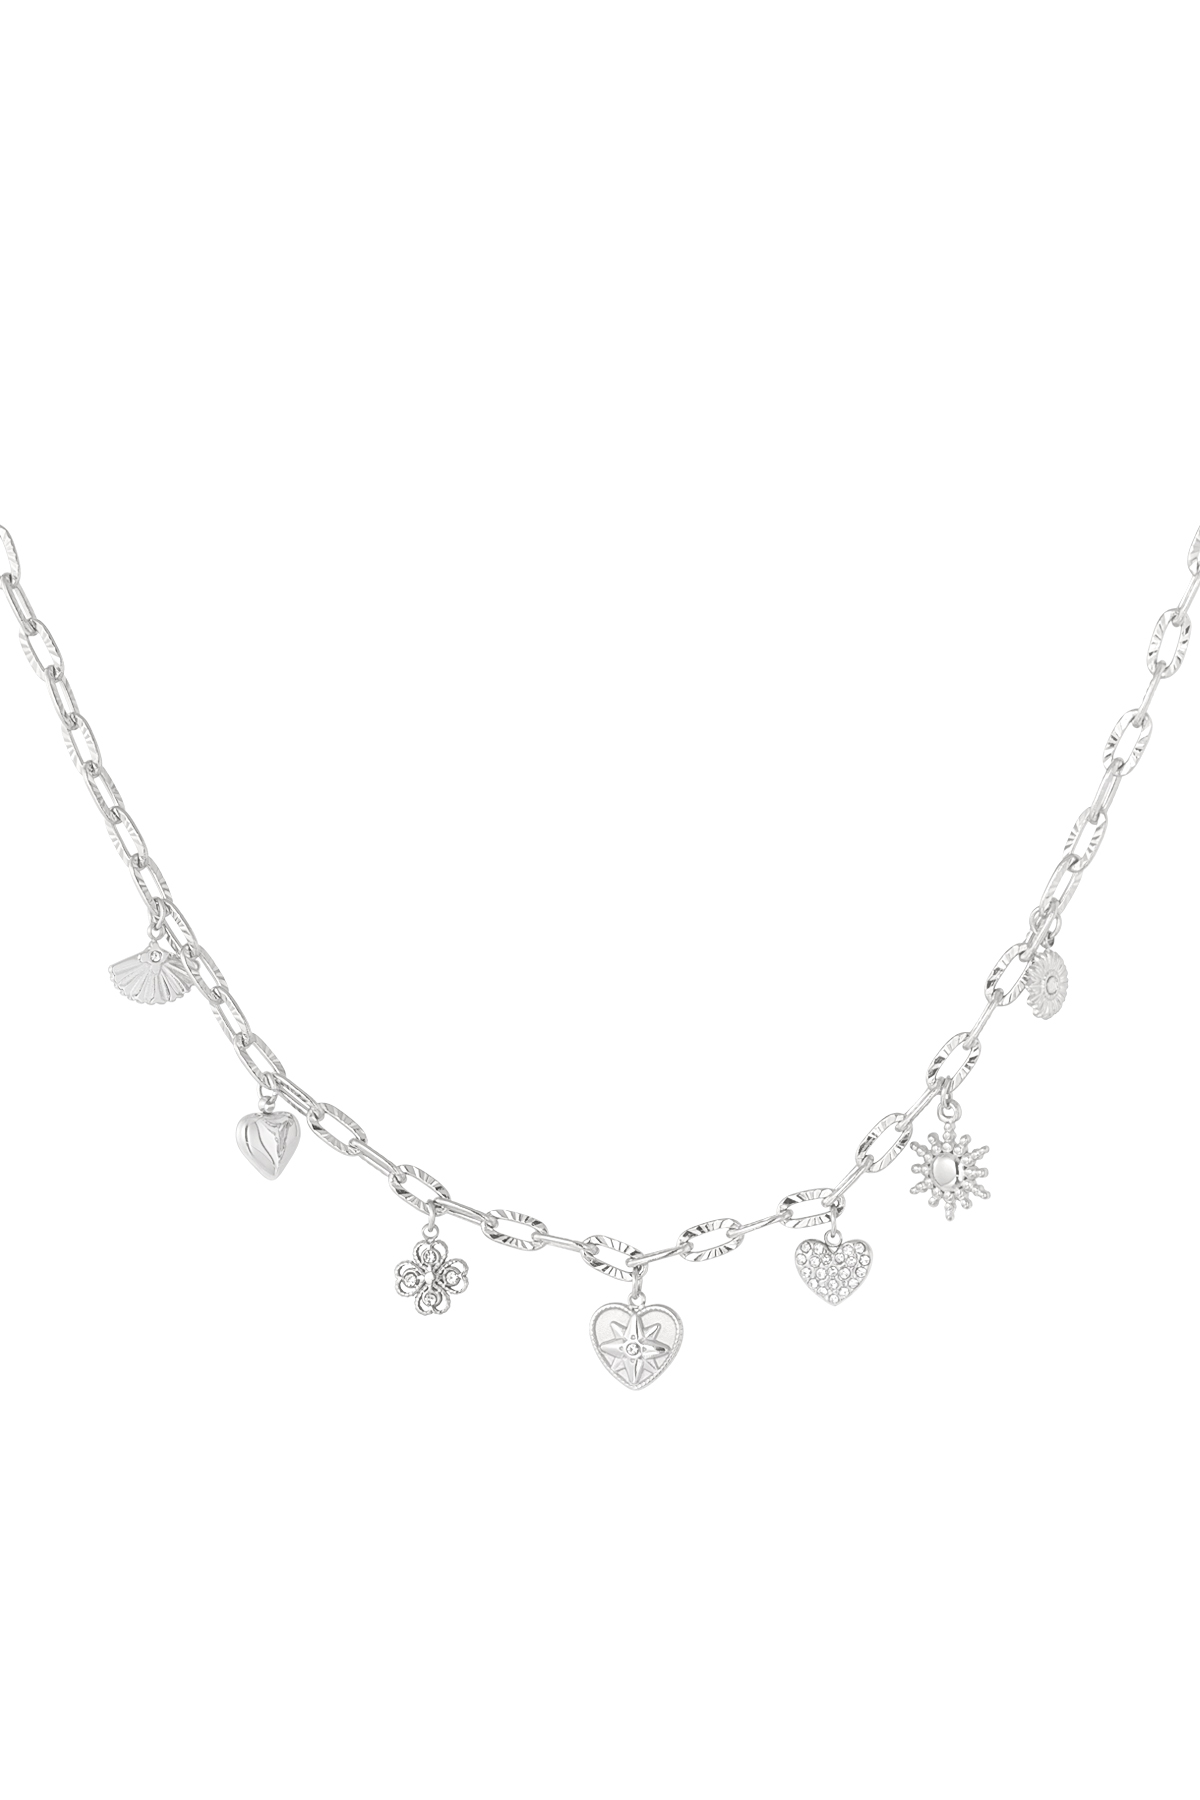 Charm necklace daily style - silver h5 